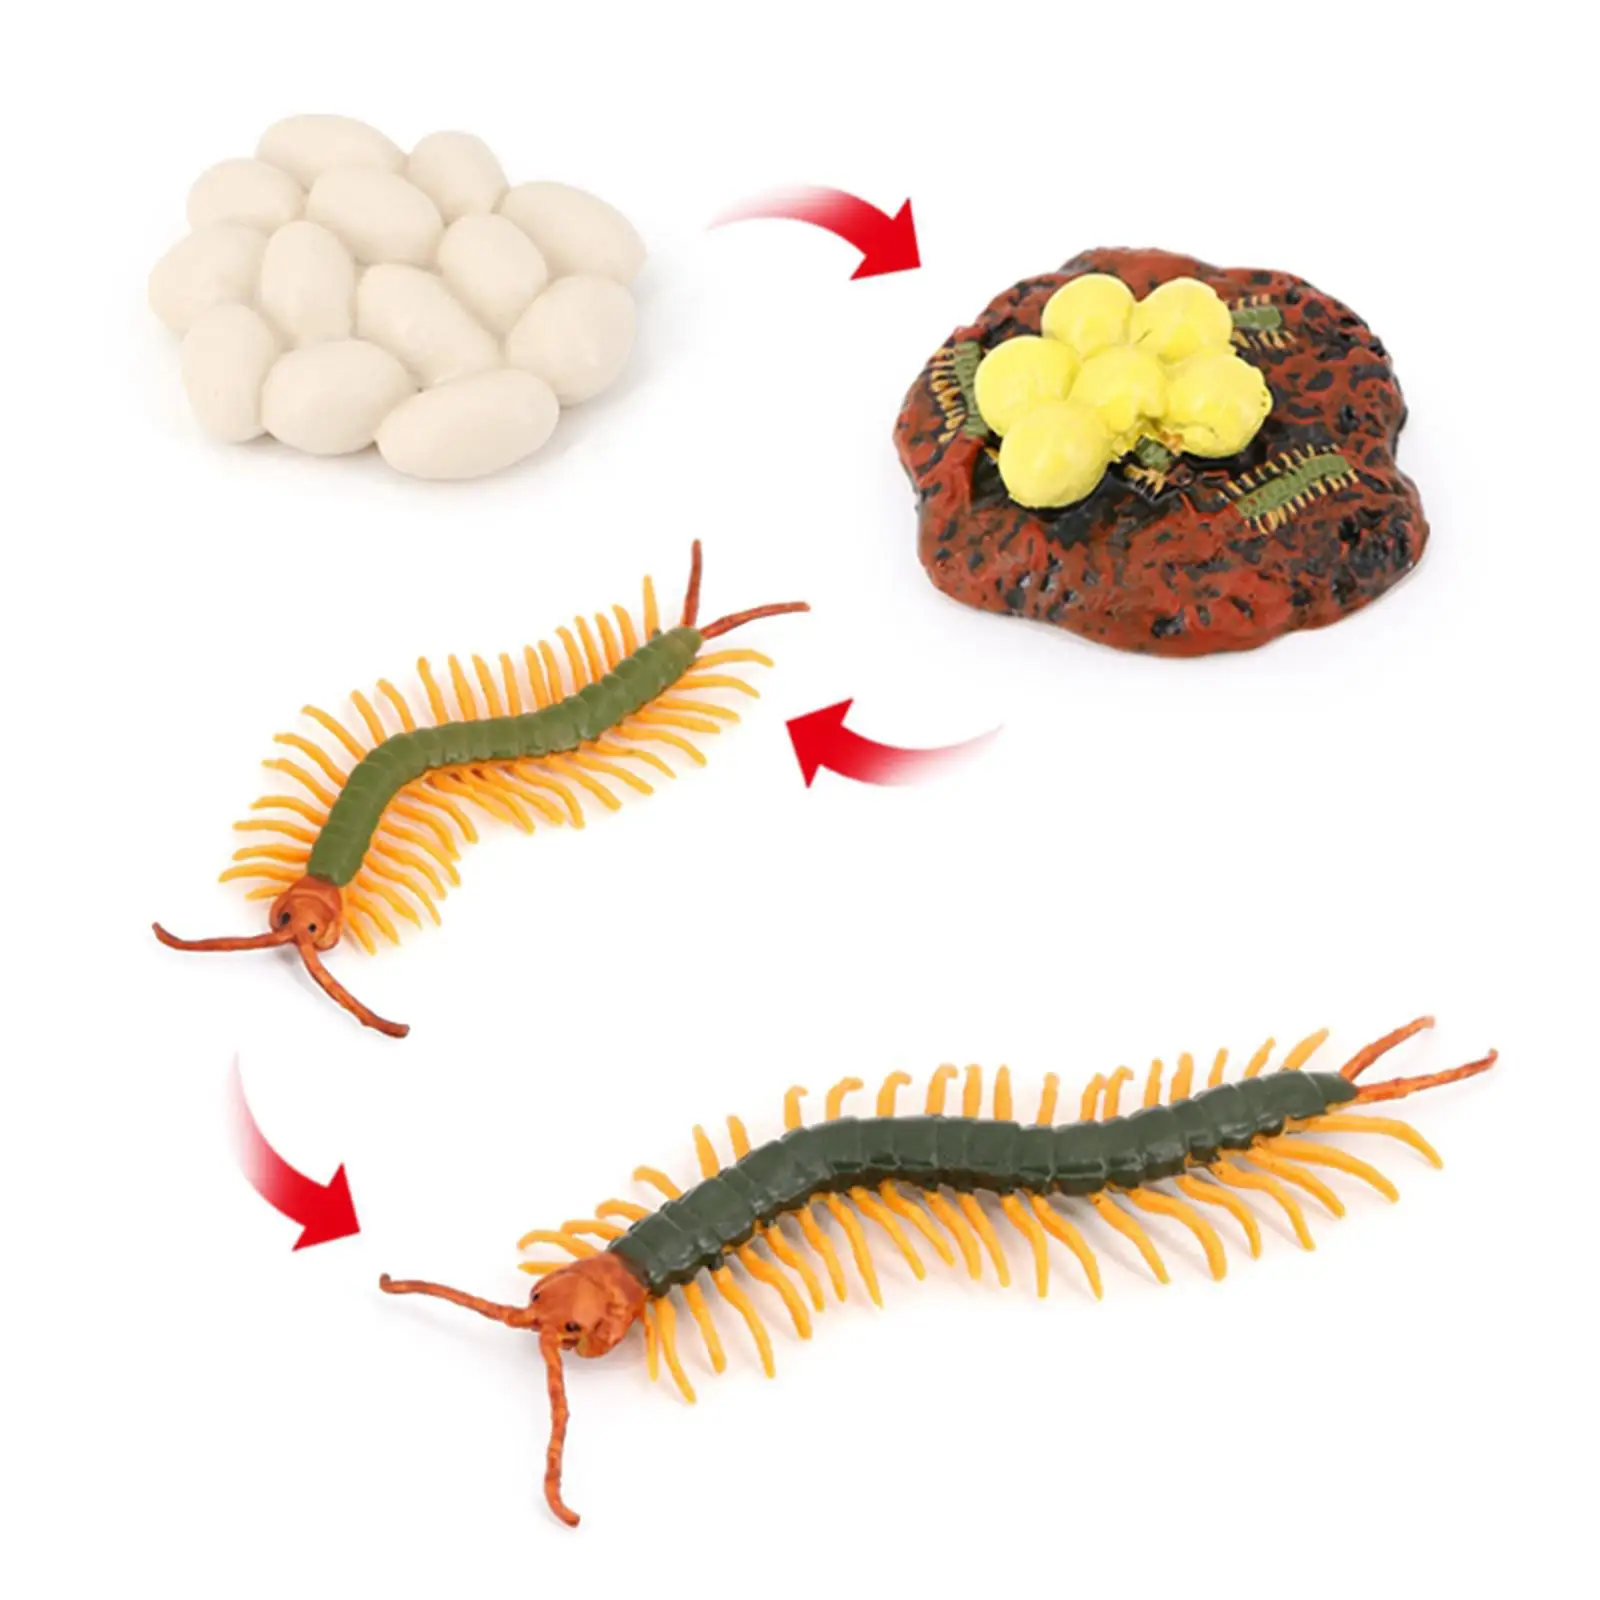 4X NATURE CENTIPEDE GROWTH TOY ANIMAL GROWTH CYCLE REALISTIC EDUCATIONAL AID